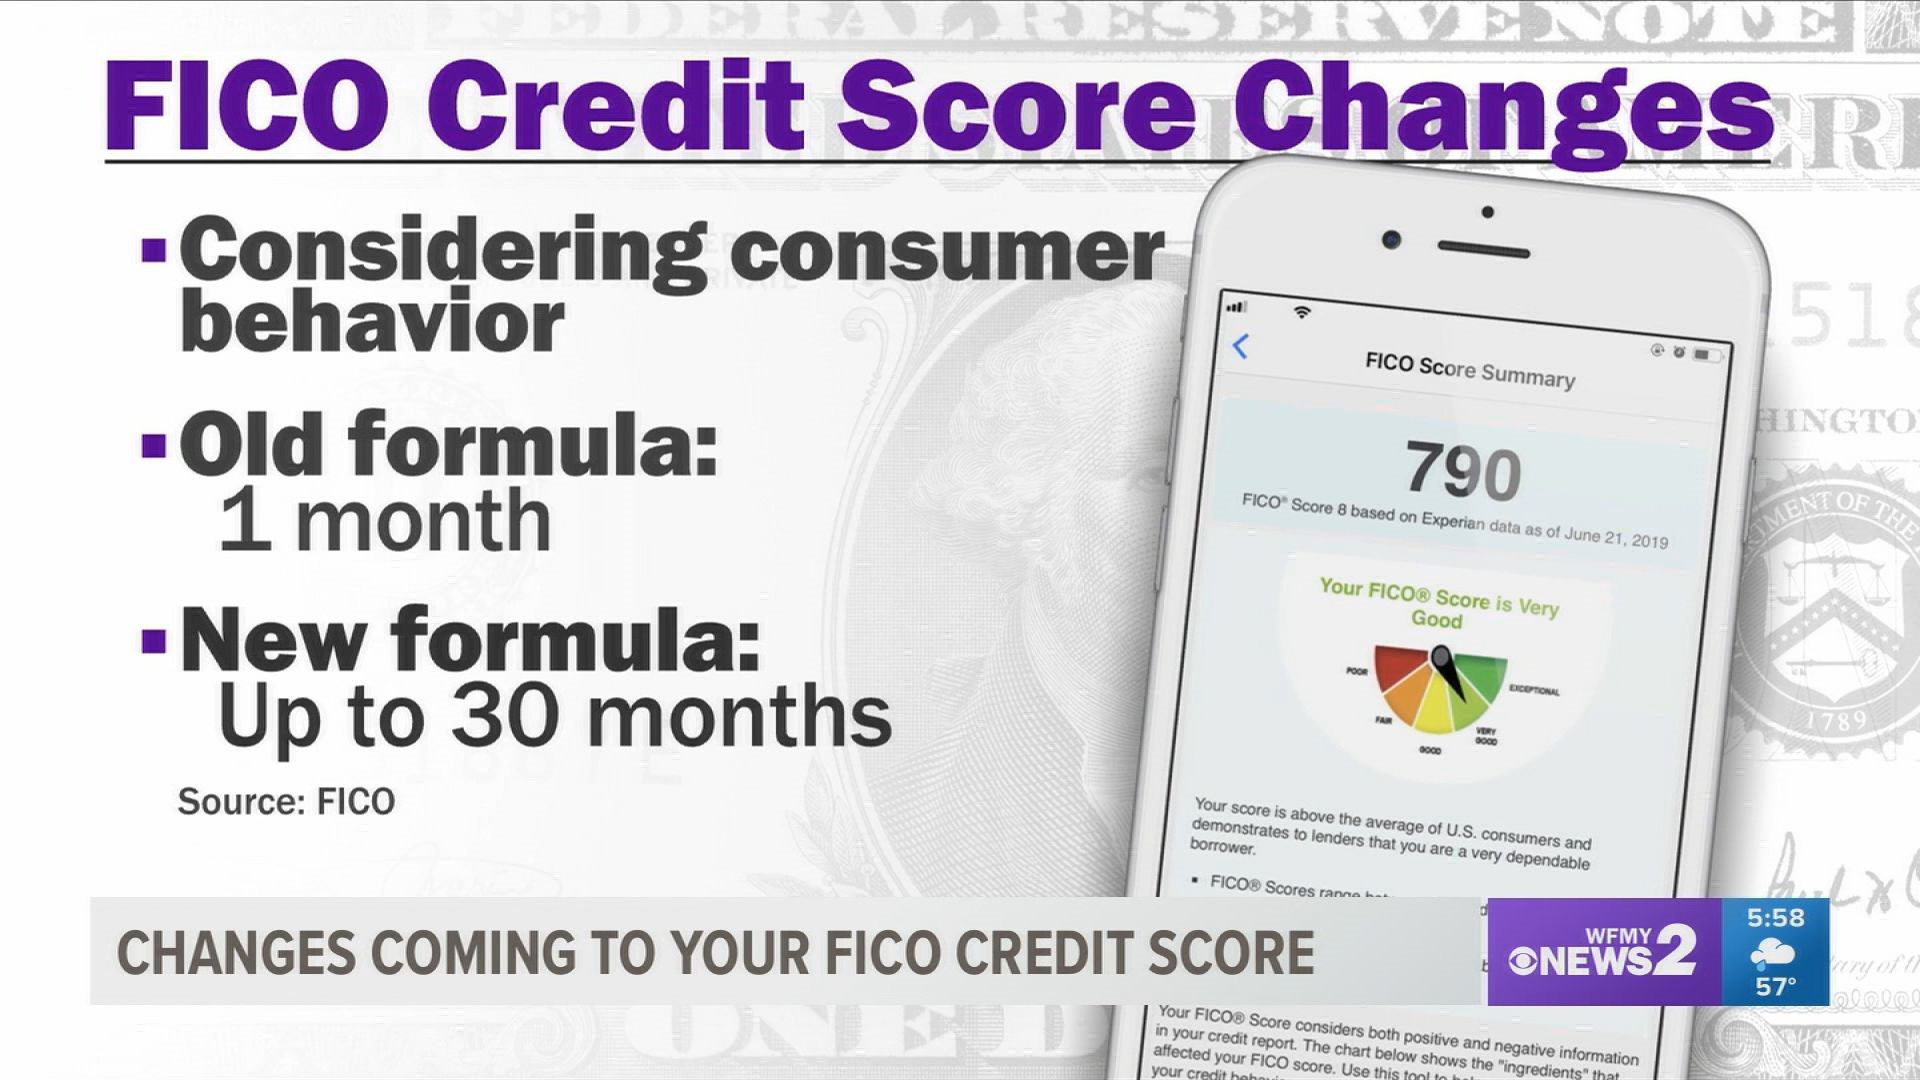 A change in the formula may increase or decrease your FICO credit score